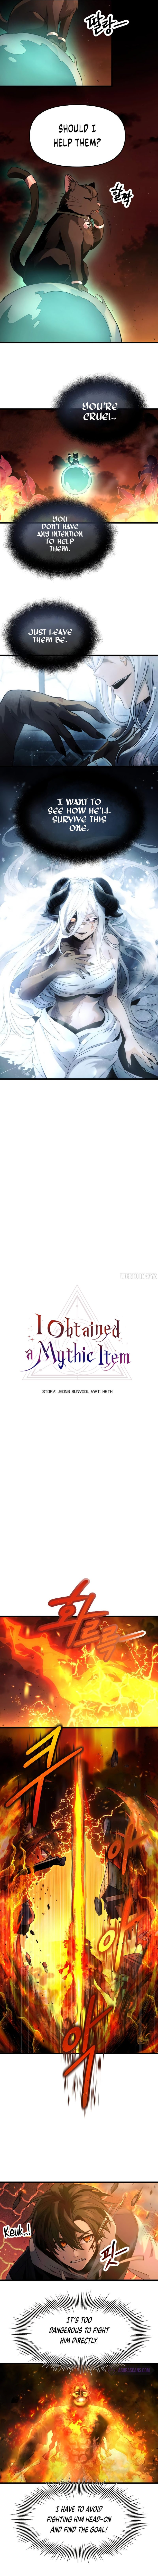 i-obtained-a-mythic-item-chap-47-2